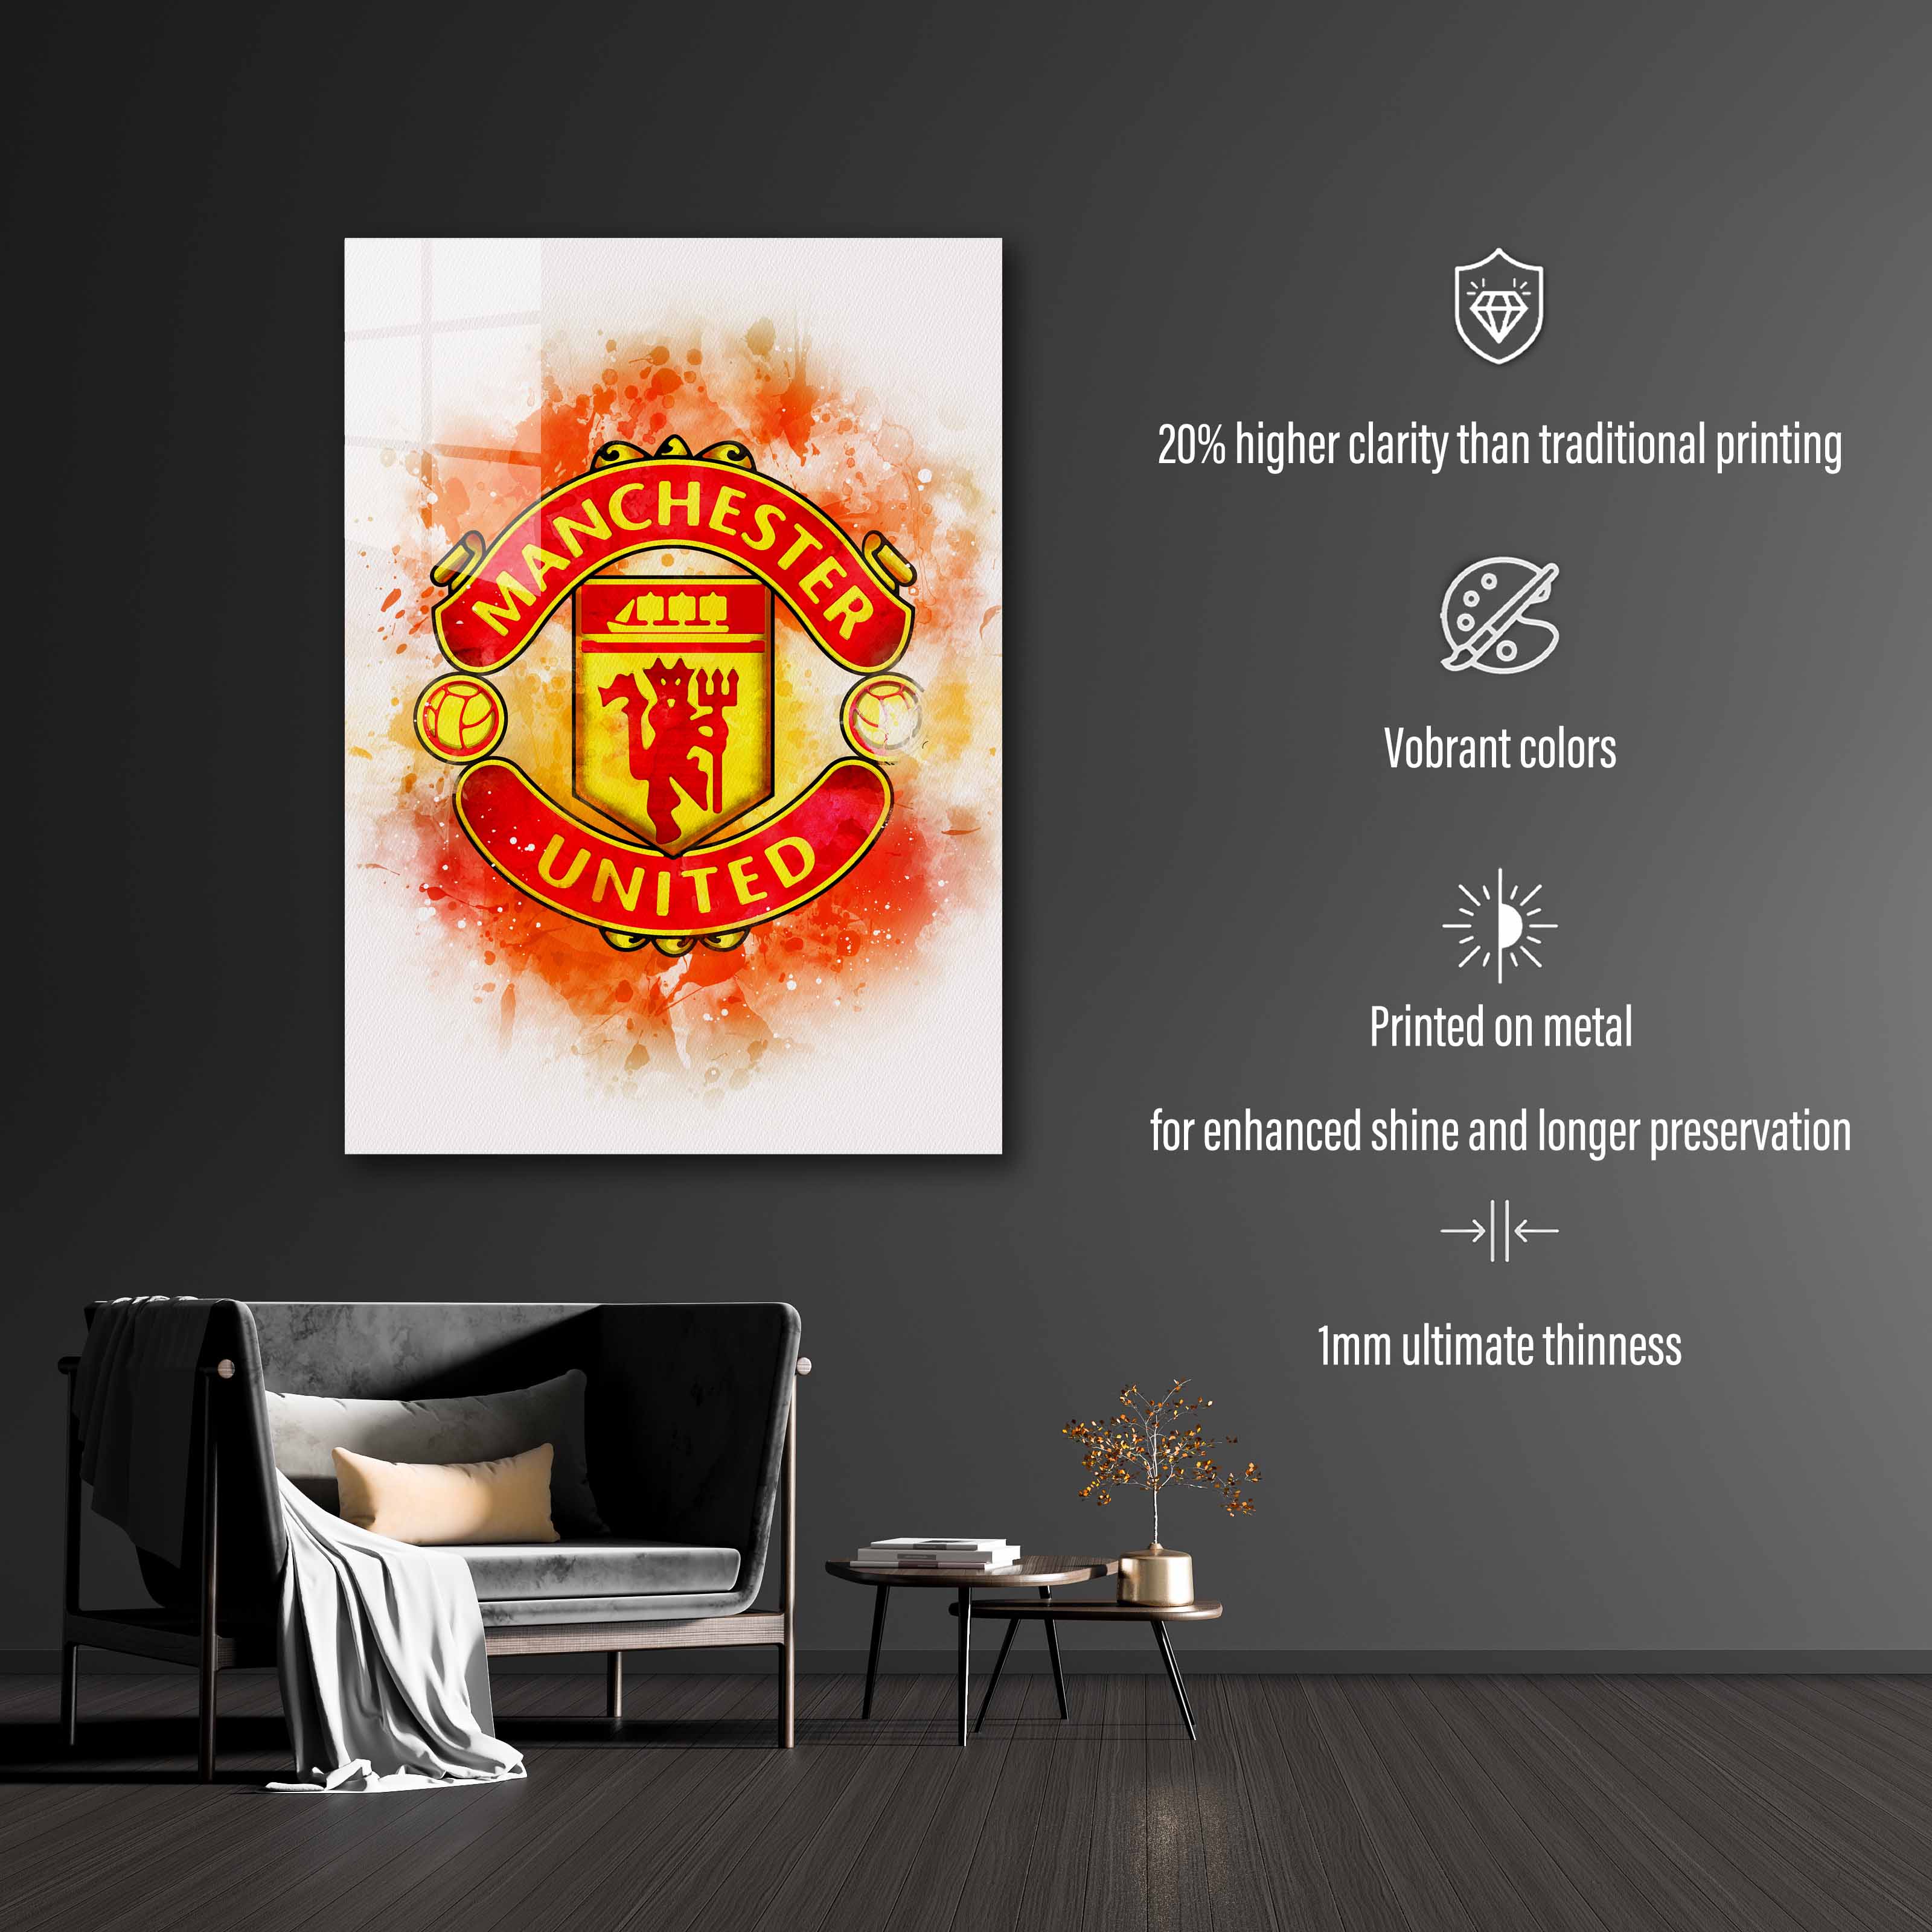 Manchester United poster-designed by @Hoang Van Thuan